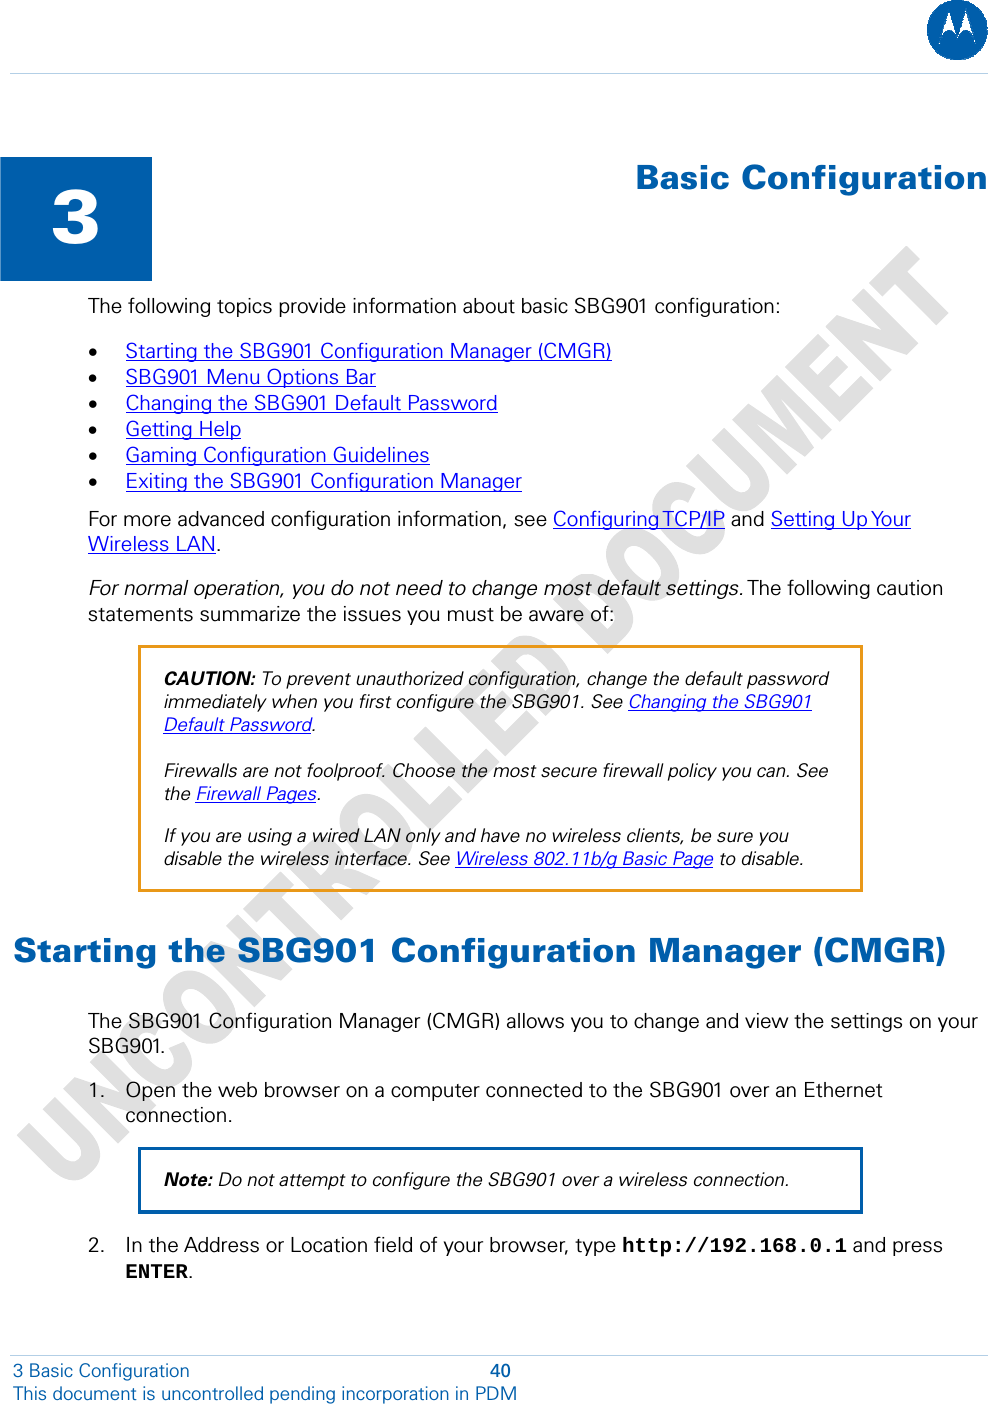   3  Basic ConfigurationThe following topics provide information about basic SBG901 configuration: • Starting the SBG901 Configuration Manager (CMGR) • SBG901 Menu Options Bar • Changing the SBG901 Default Password • Getting Help • Gaming Configuration Guidelines • Exiting the SBG901 Configuration Manager For more advanced configuration information, see Configuring TCP/IP and Setting Up Your Wireless LAN. For normal operation, you do not need to change most default settings. The following caution statements summarize the issues you must be aware of: CAUTION: To prevent unauthorized configuration, change the default password immediately when you first configure the SBG901. See Changing the SBG901 Default Password.  Firewalls are not foolproof. Choose the most secure firewall policy you can. See the Firewall Pages. If you are using a wired LAN only and have no wireless clients, be sure you disable the wireless interface. See Wireless 802.11b/g Basic Page to disable. Starting the SBG901 Configuration Manager (CMGR) The SBG901 Configuration Manager (CMGR) allows you to change and view the settings on your SBG901. 1. Open the web browser on a computer connected to the SBG901 over an Ethernet connection. Note: Do not attempt to configure the SBG901 over a wireless connection. 2. In the Address or Location field of your browser, type http://192.168.0.1 and press ENTER. 3 Basic Configuration  40 This document is uncontrolled pending incorporation in PDM  